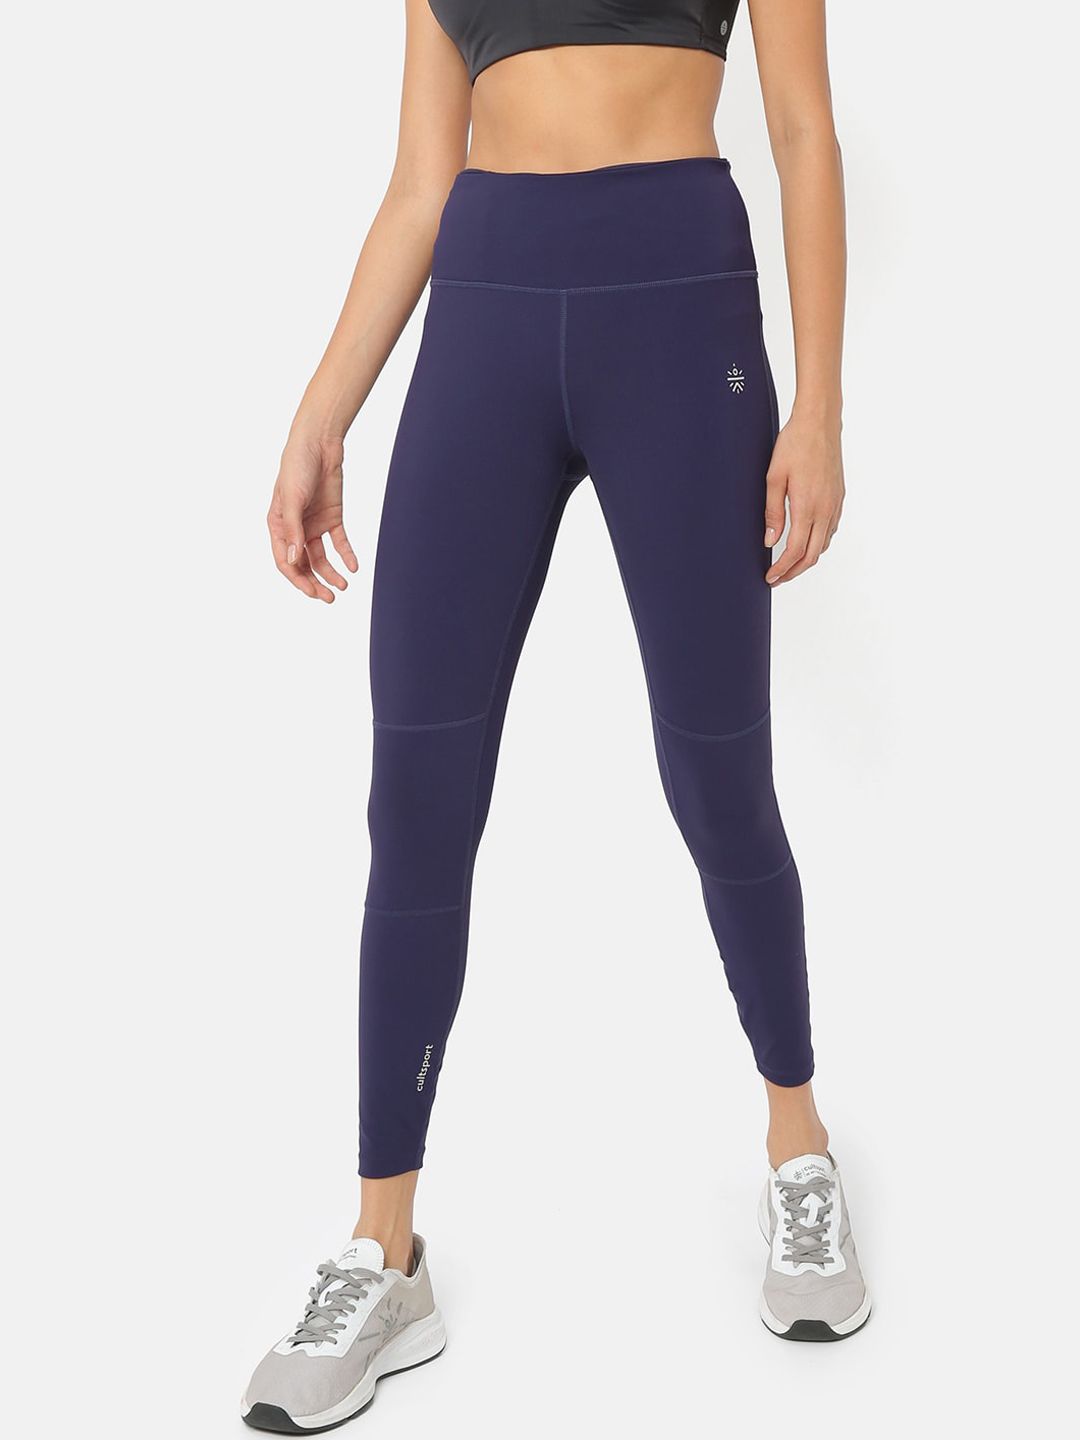 Cultsport Women Navy Blue Solid Quick-Dry High Waist Tights Price in India